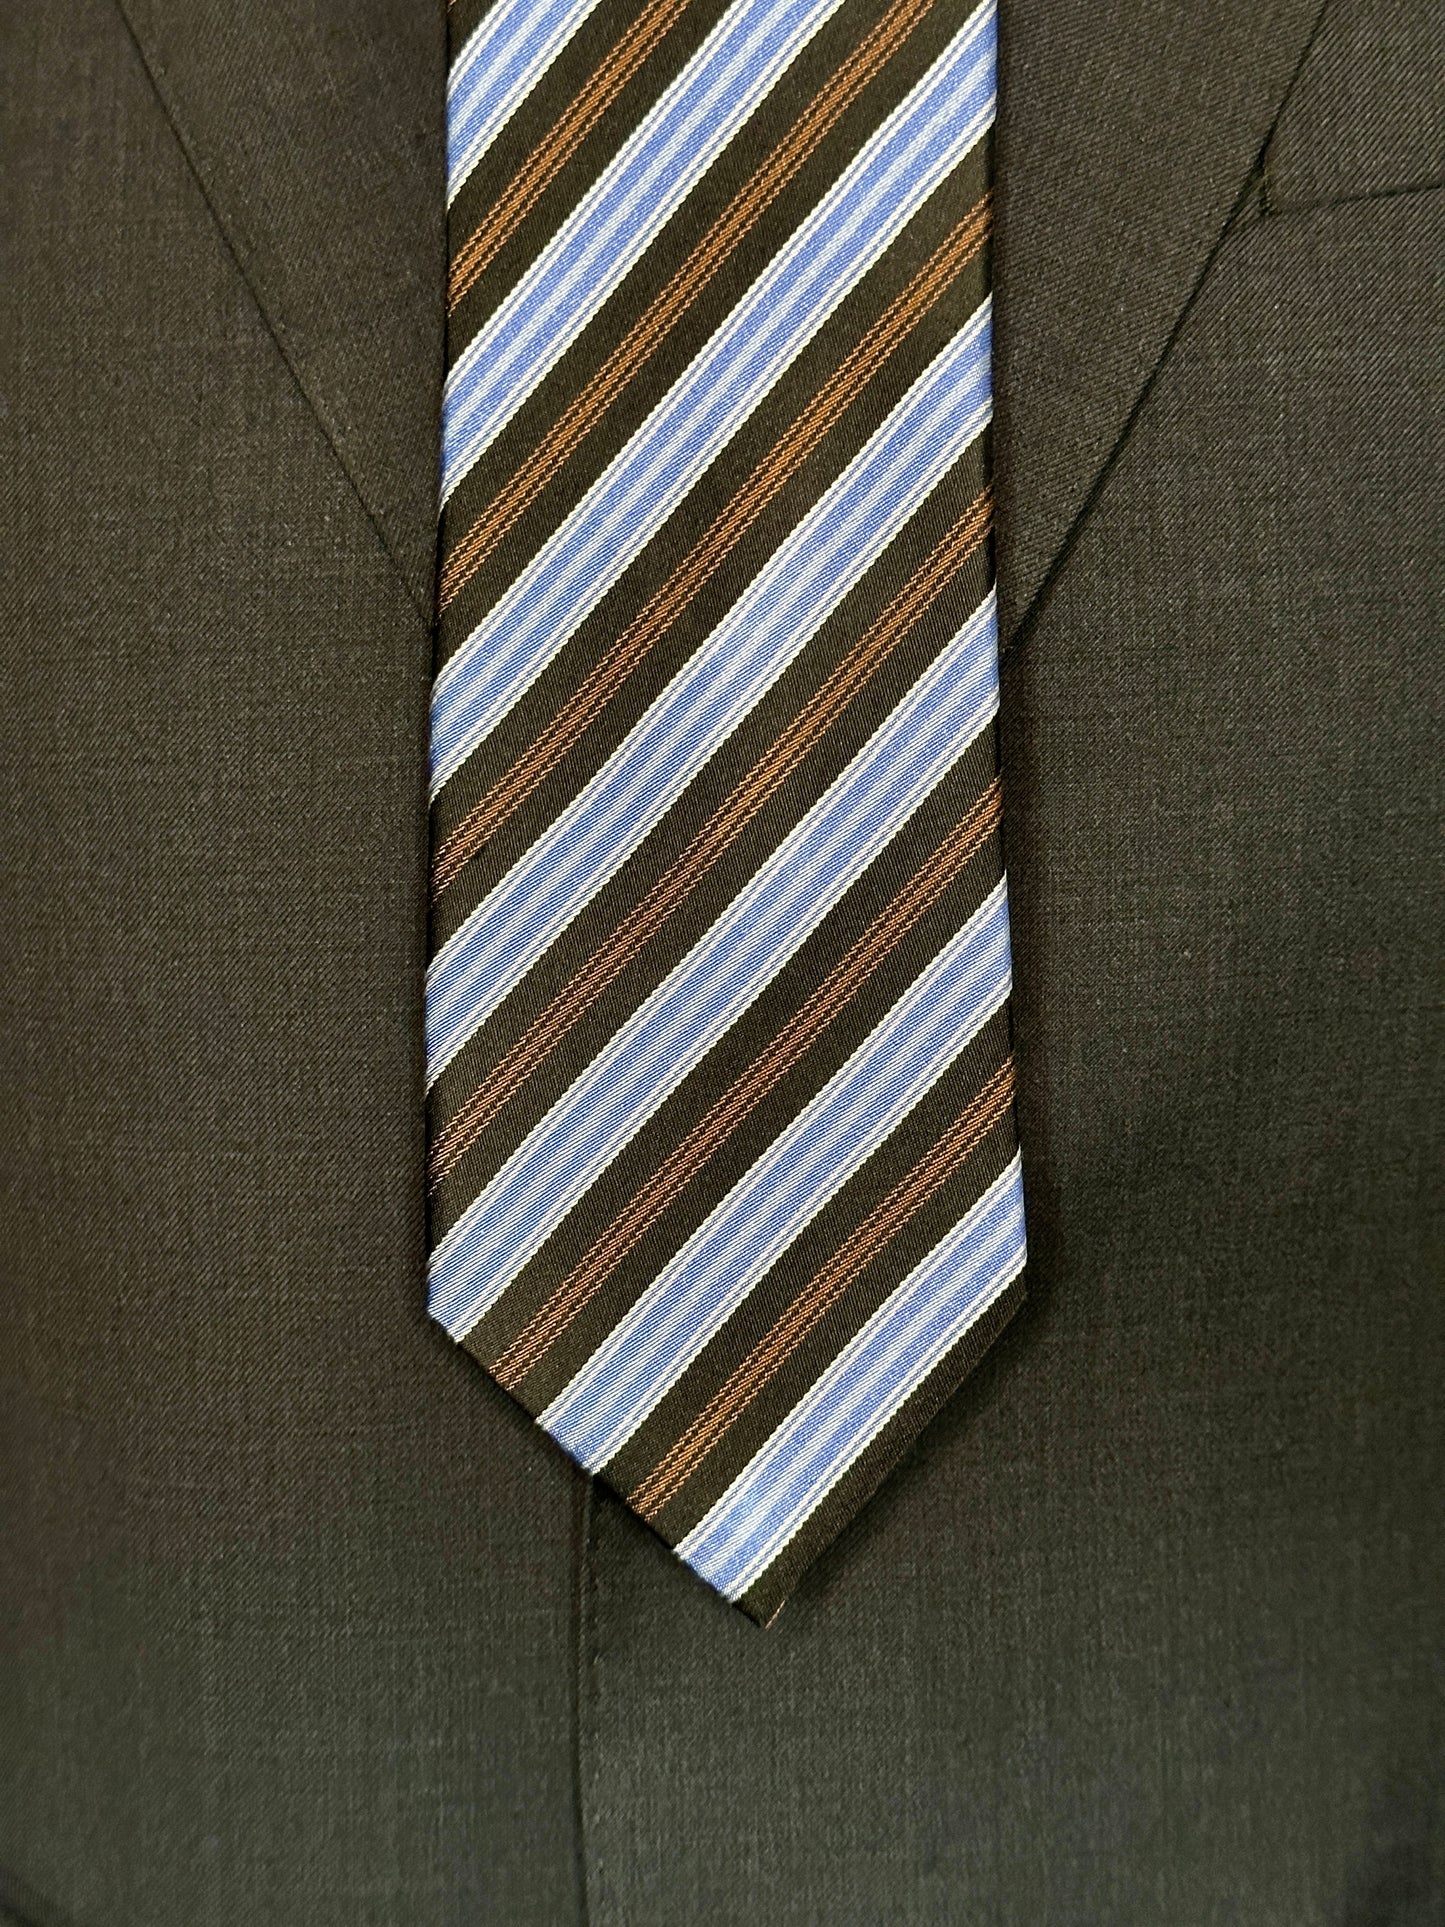 A wonderful 100% silk woven tie in clean stripes. Here we have a complimentary mixture of colors from brown and black with baby blue and white. This tie is a great business tie and would look great paired with many suit variations from black, navy, charcoal and pinstripes as well. Suits with windowpanes always do well with striped neckwear.